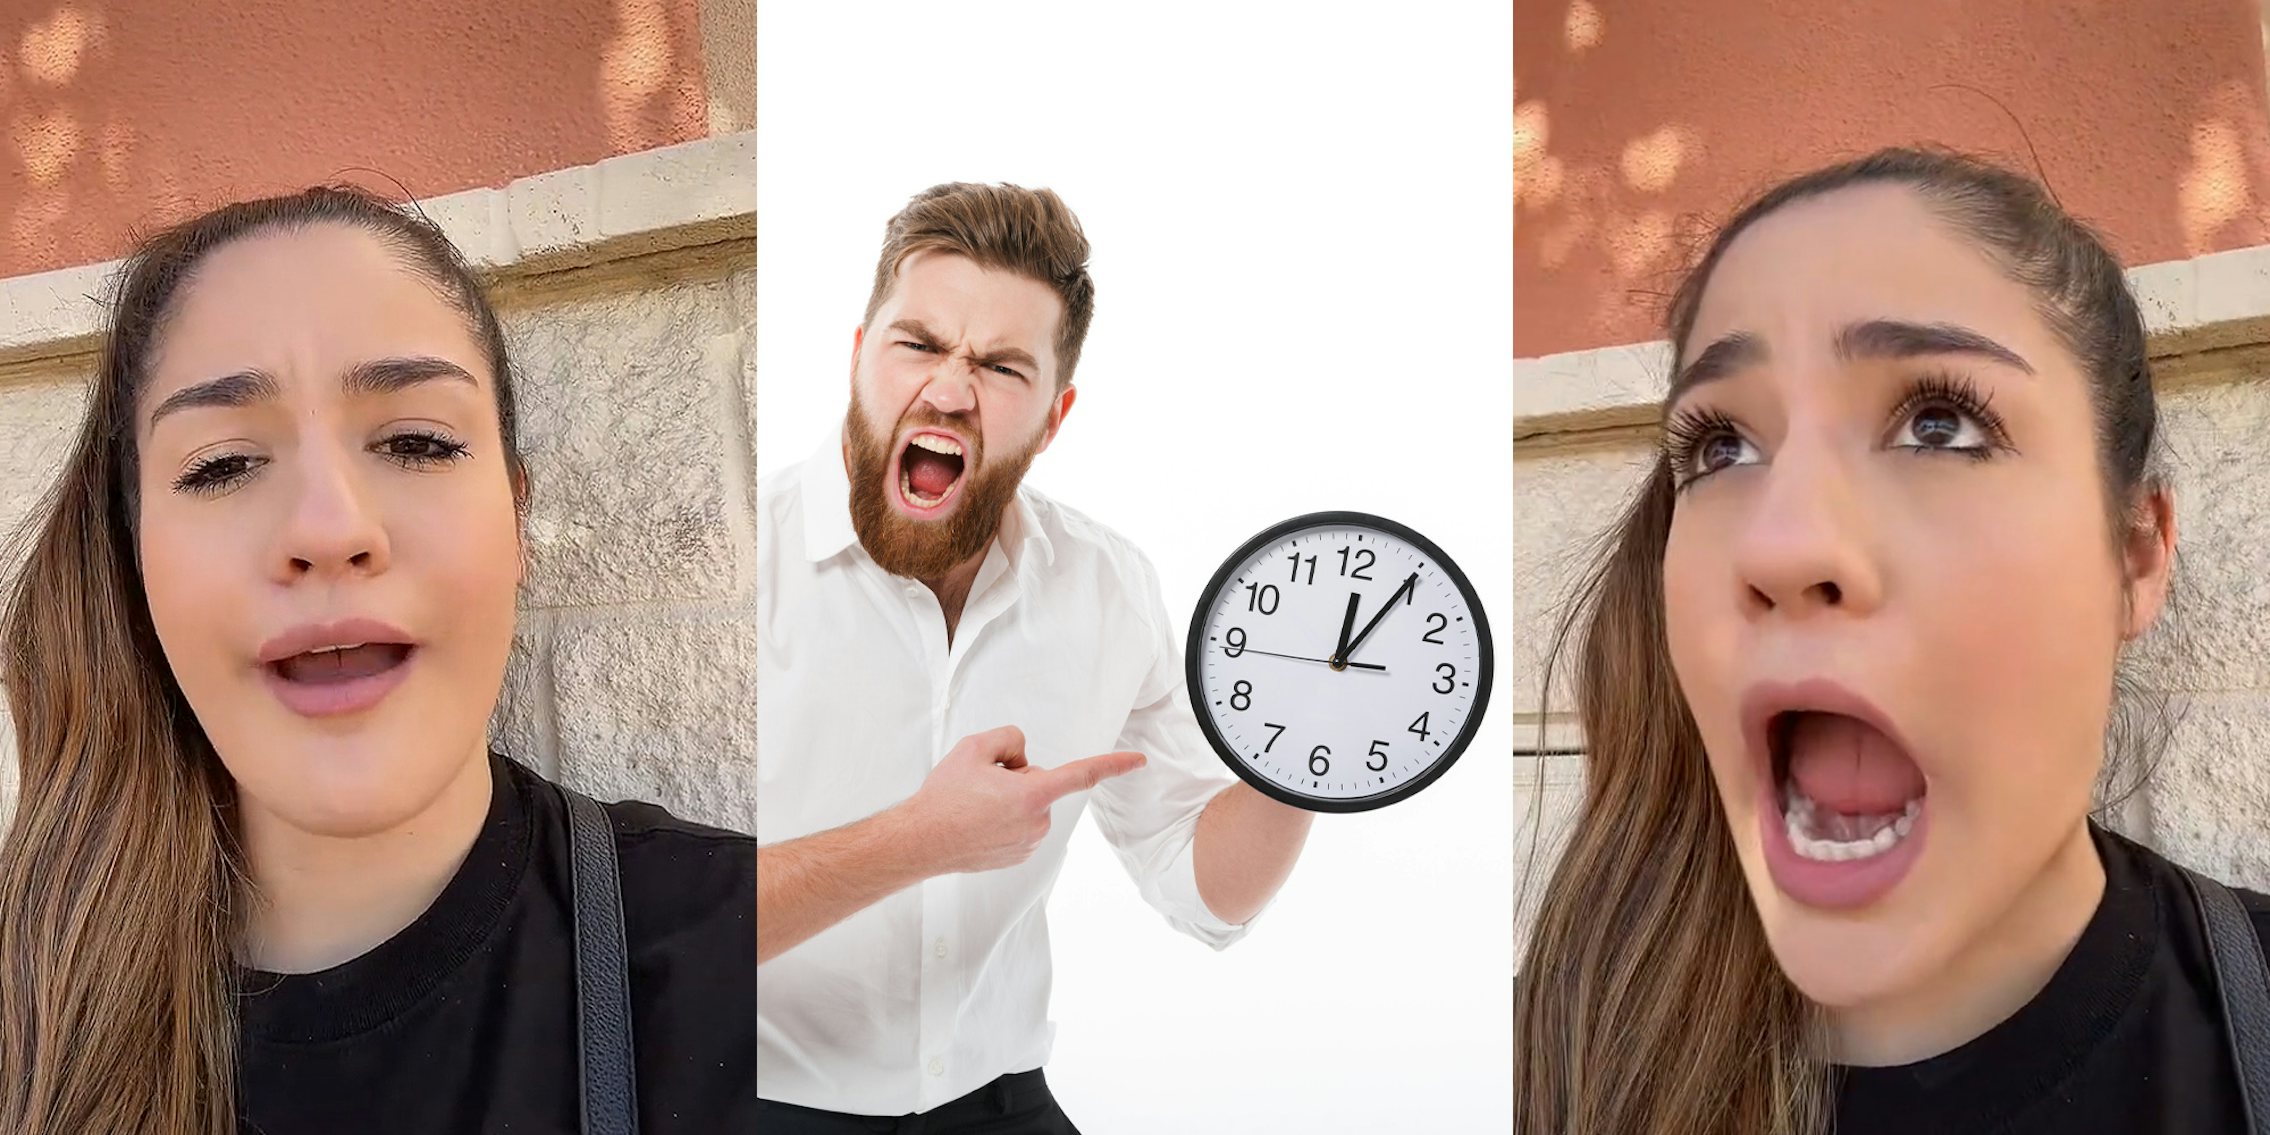 woman sitting against wall speaking annoyed face (l) man screaming and pointing to clock on white background (c) woman open mouth shocked expression sitting against wall (r)